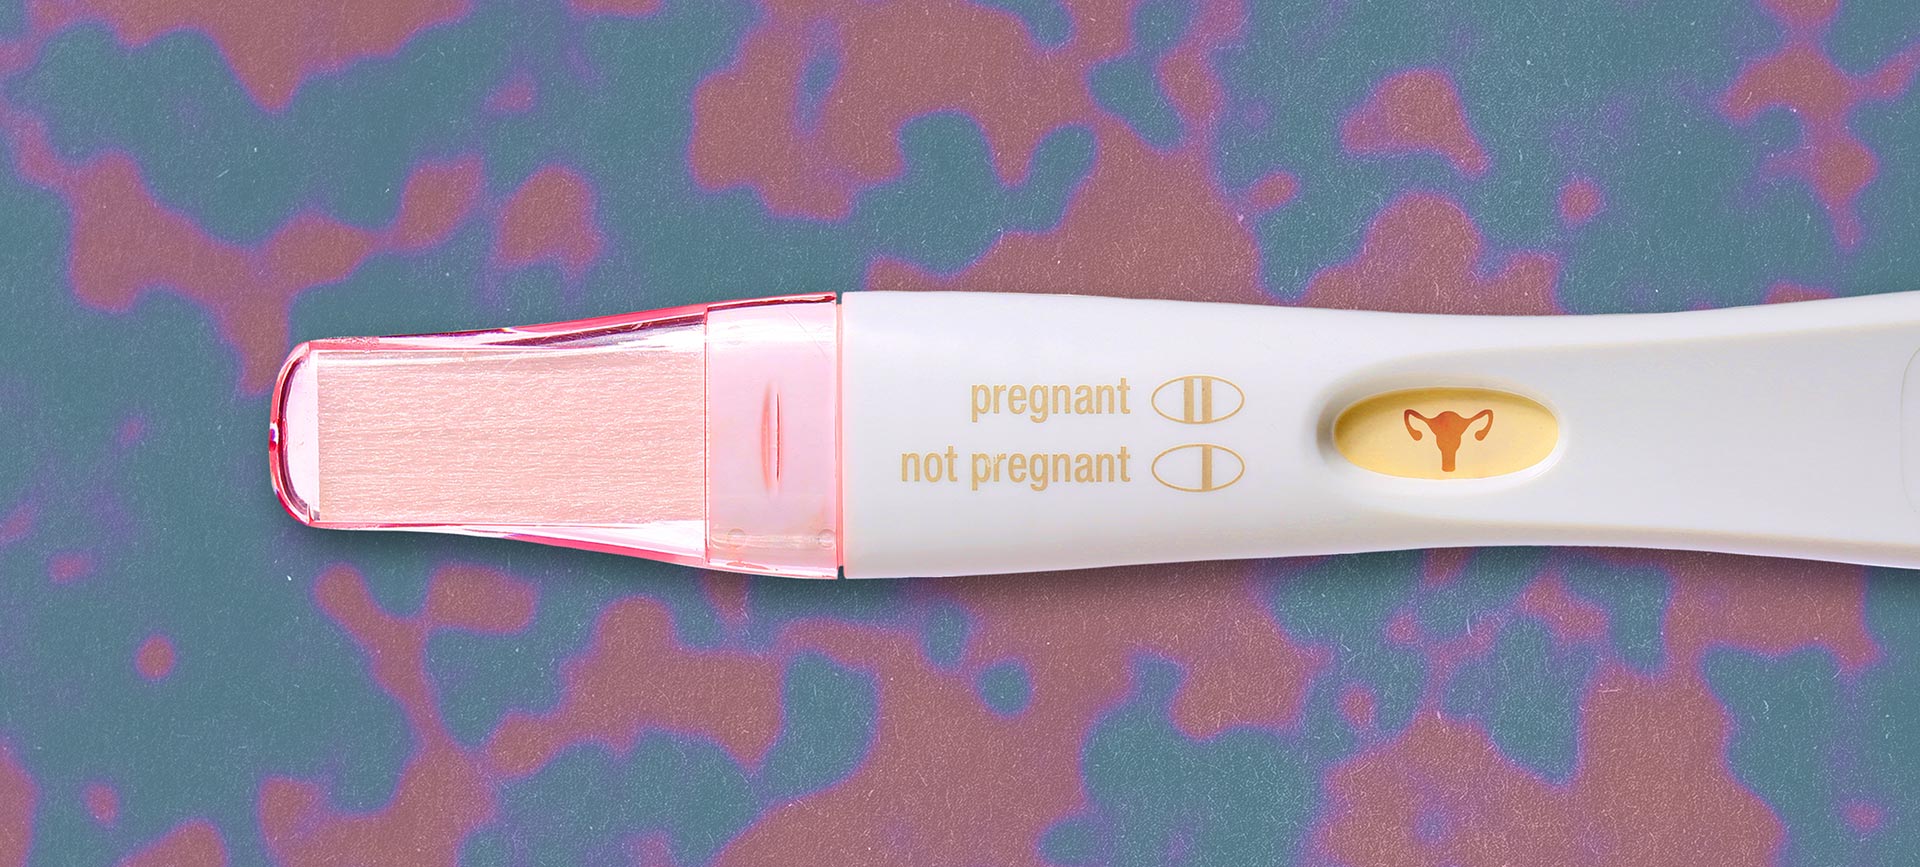 A pregnancy test with an icon of the female reproductive system is against a red and purple background.